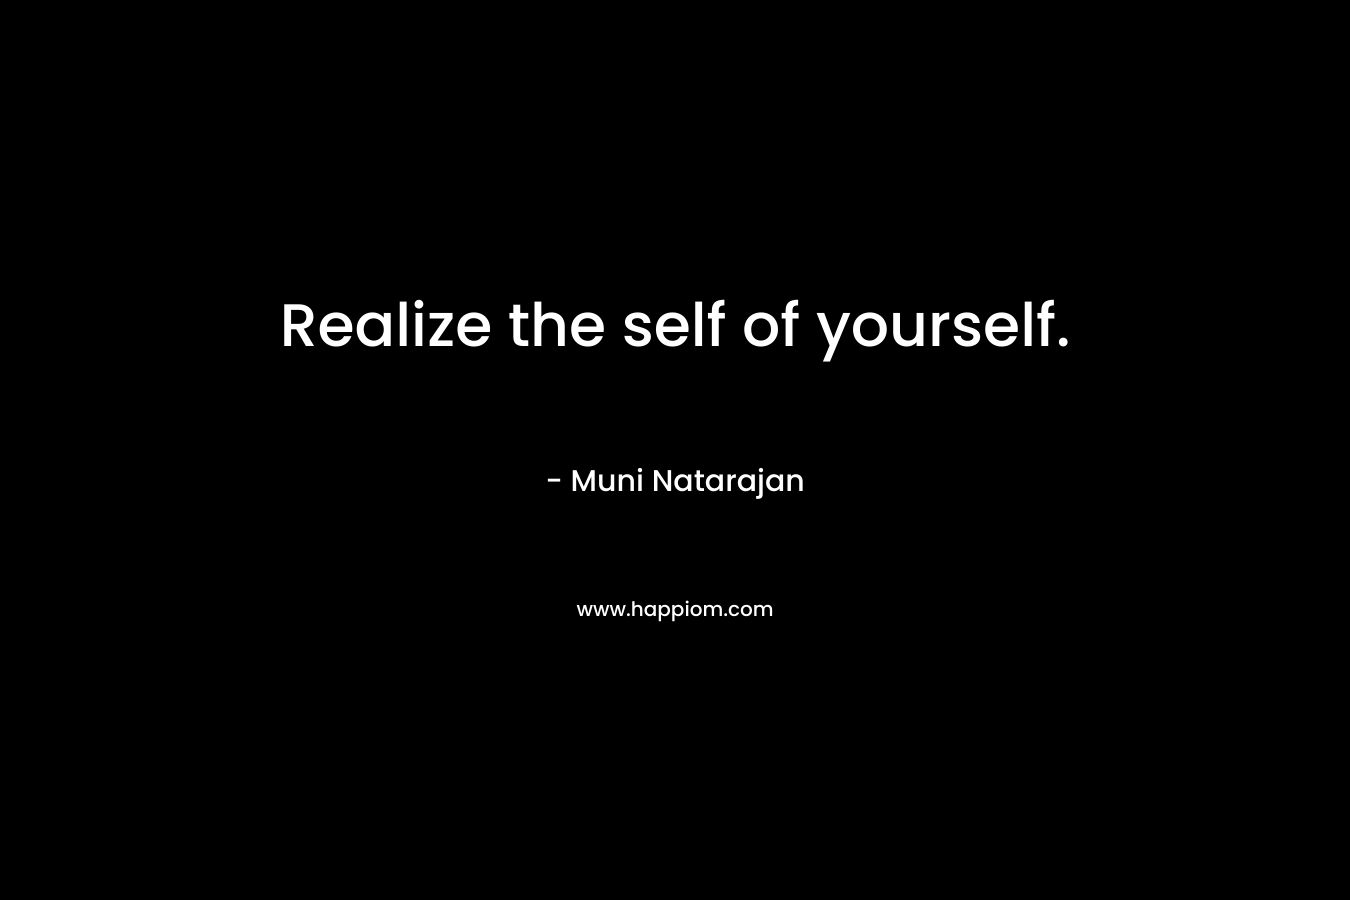 Realize the self of yourself.